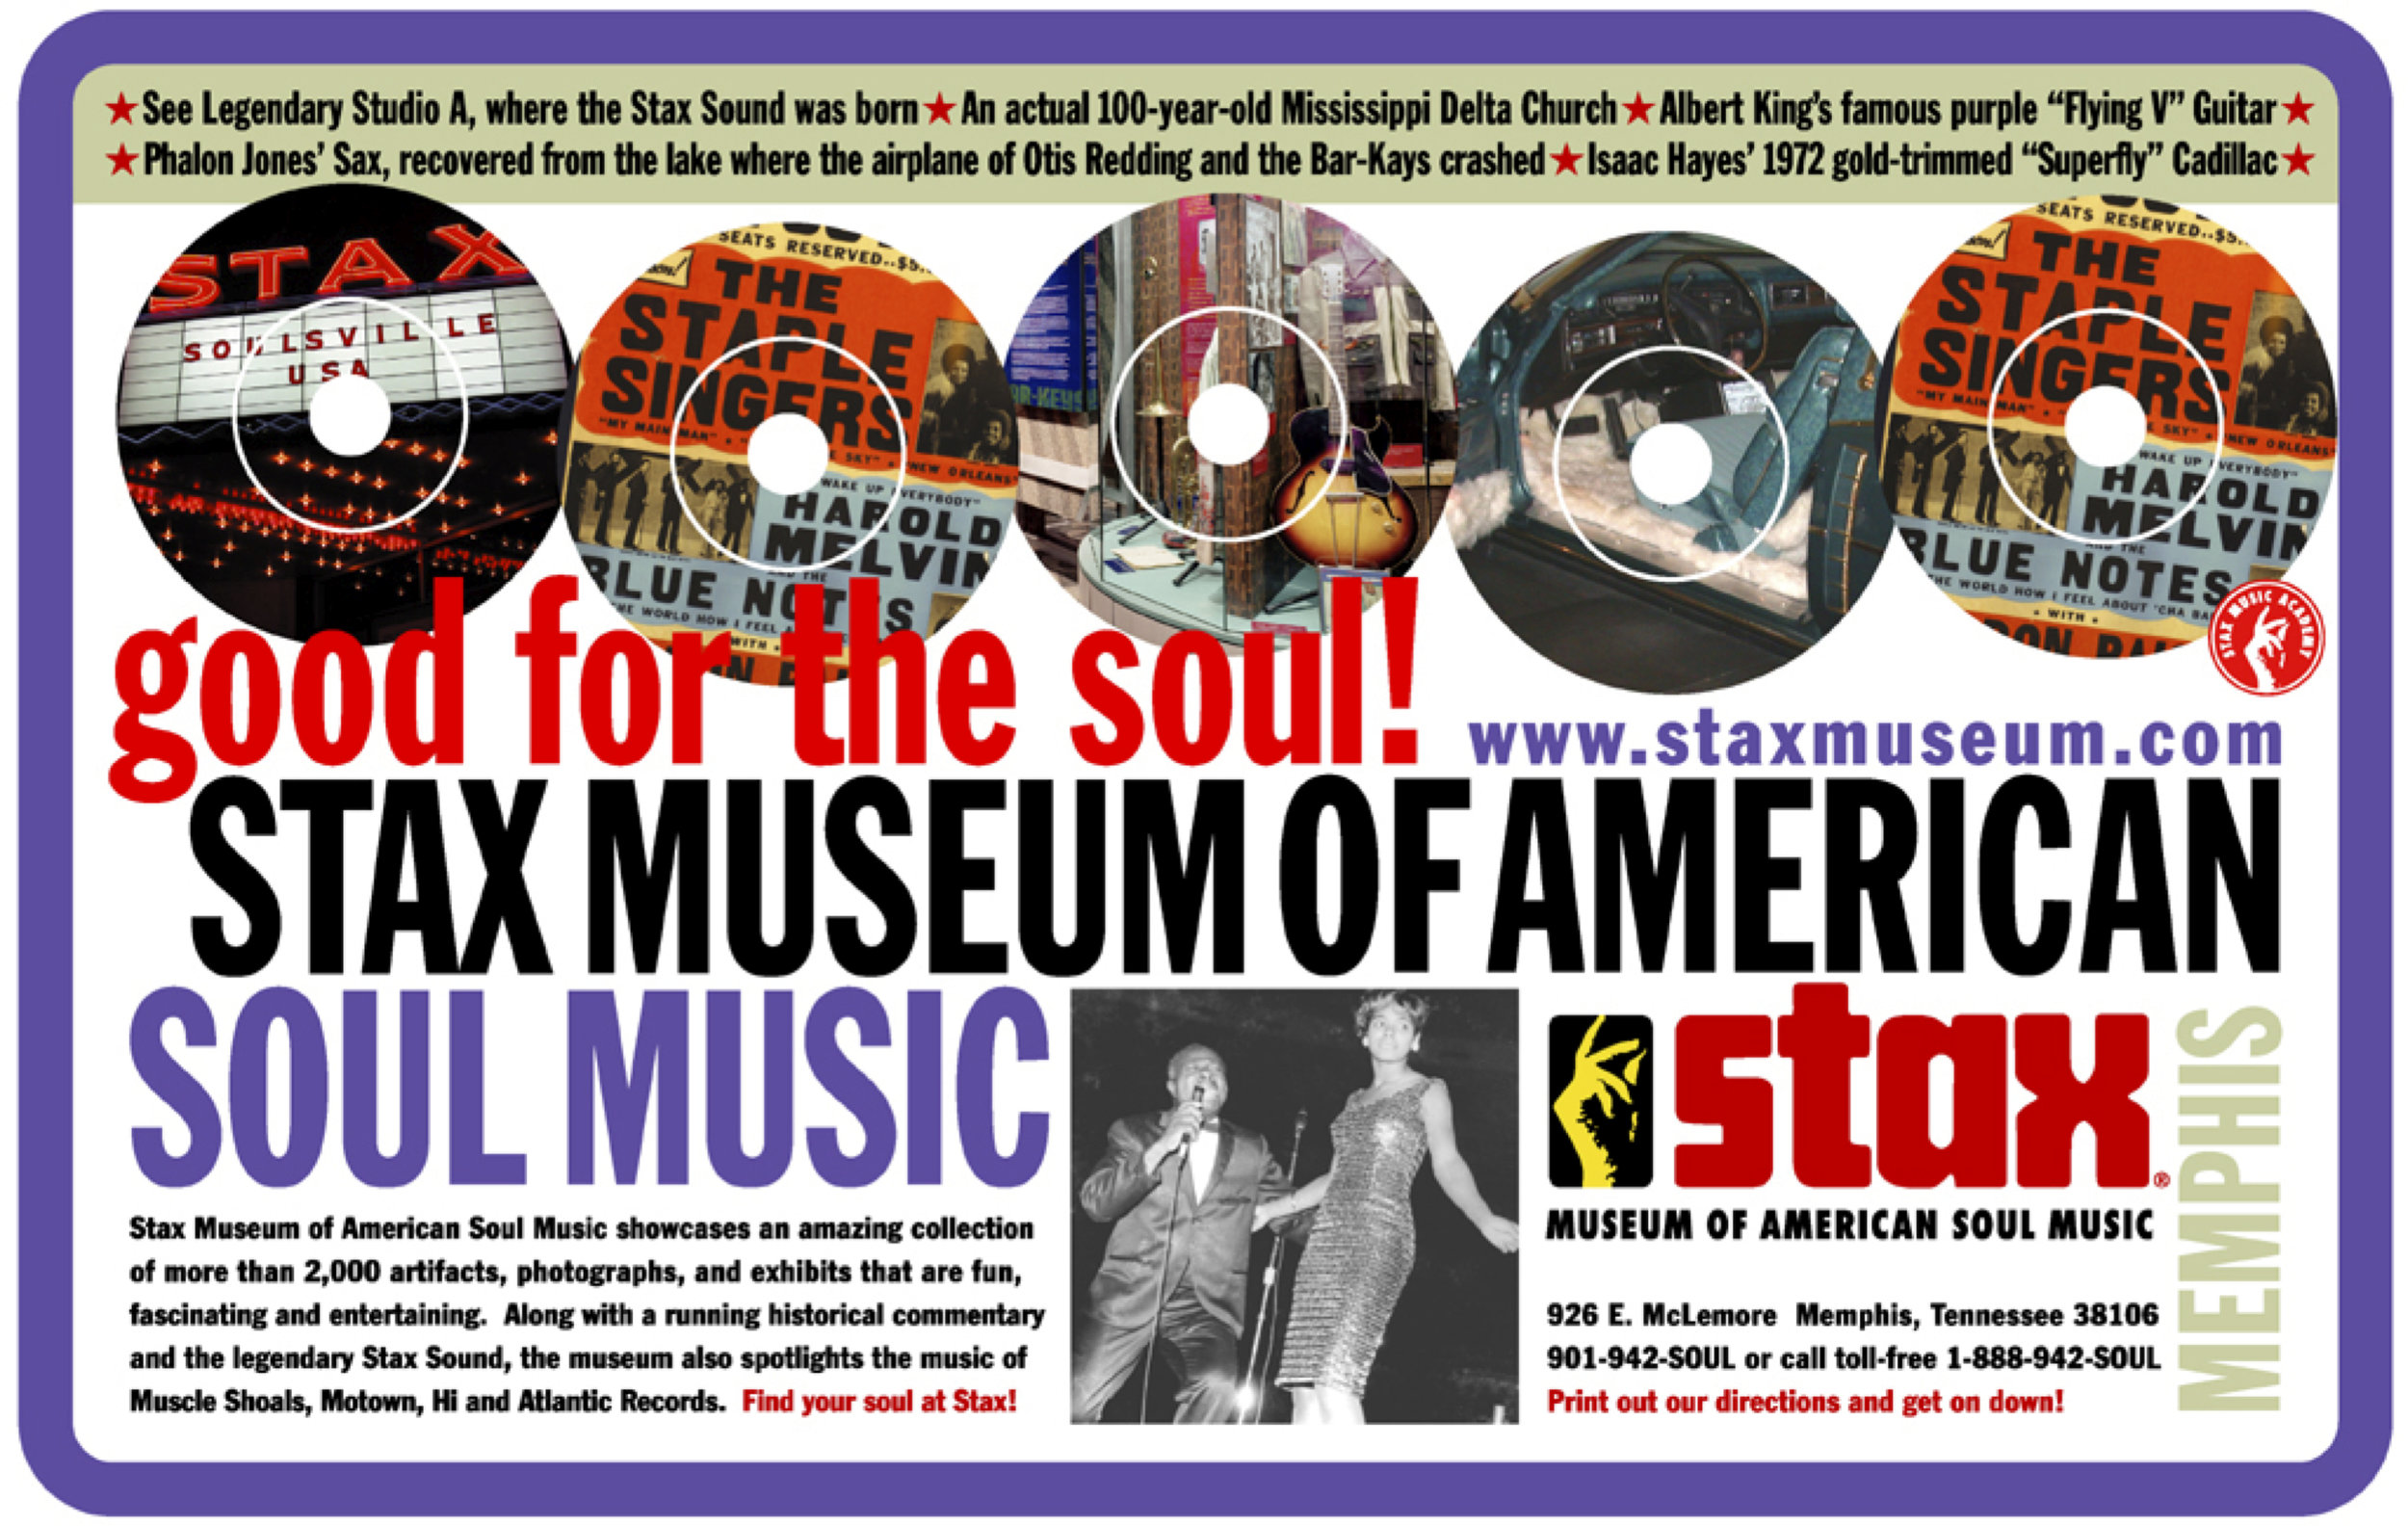  STAX Tennessee Visitors Center interactive kiosk ad  Branding creative, copy and design by Chuck Mitchell  Various photographers 